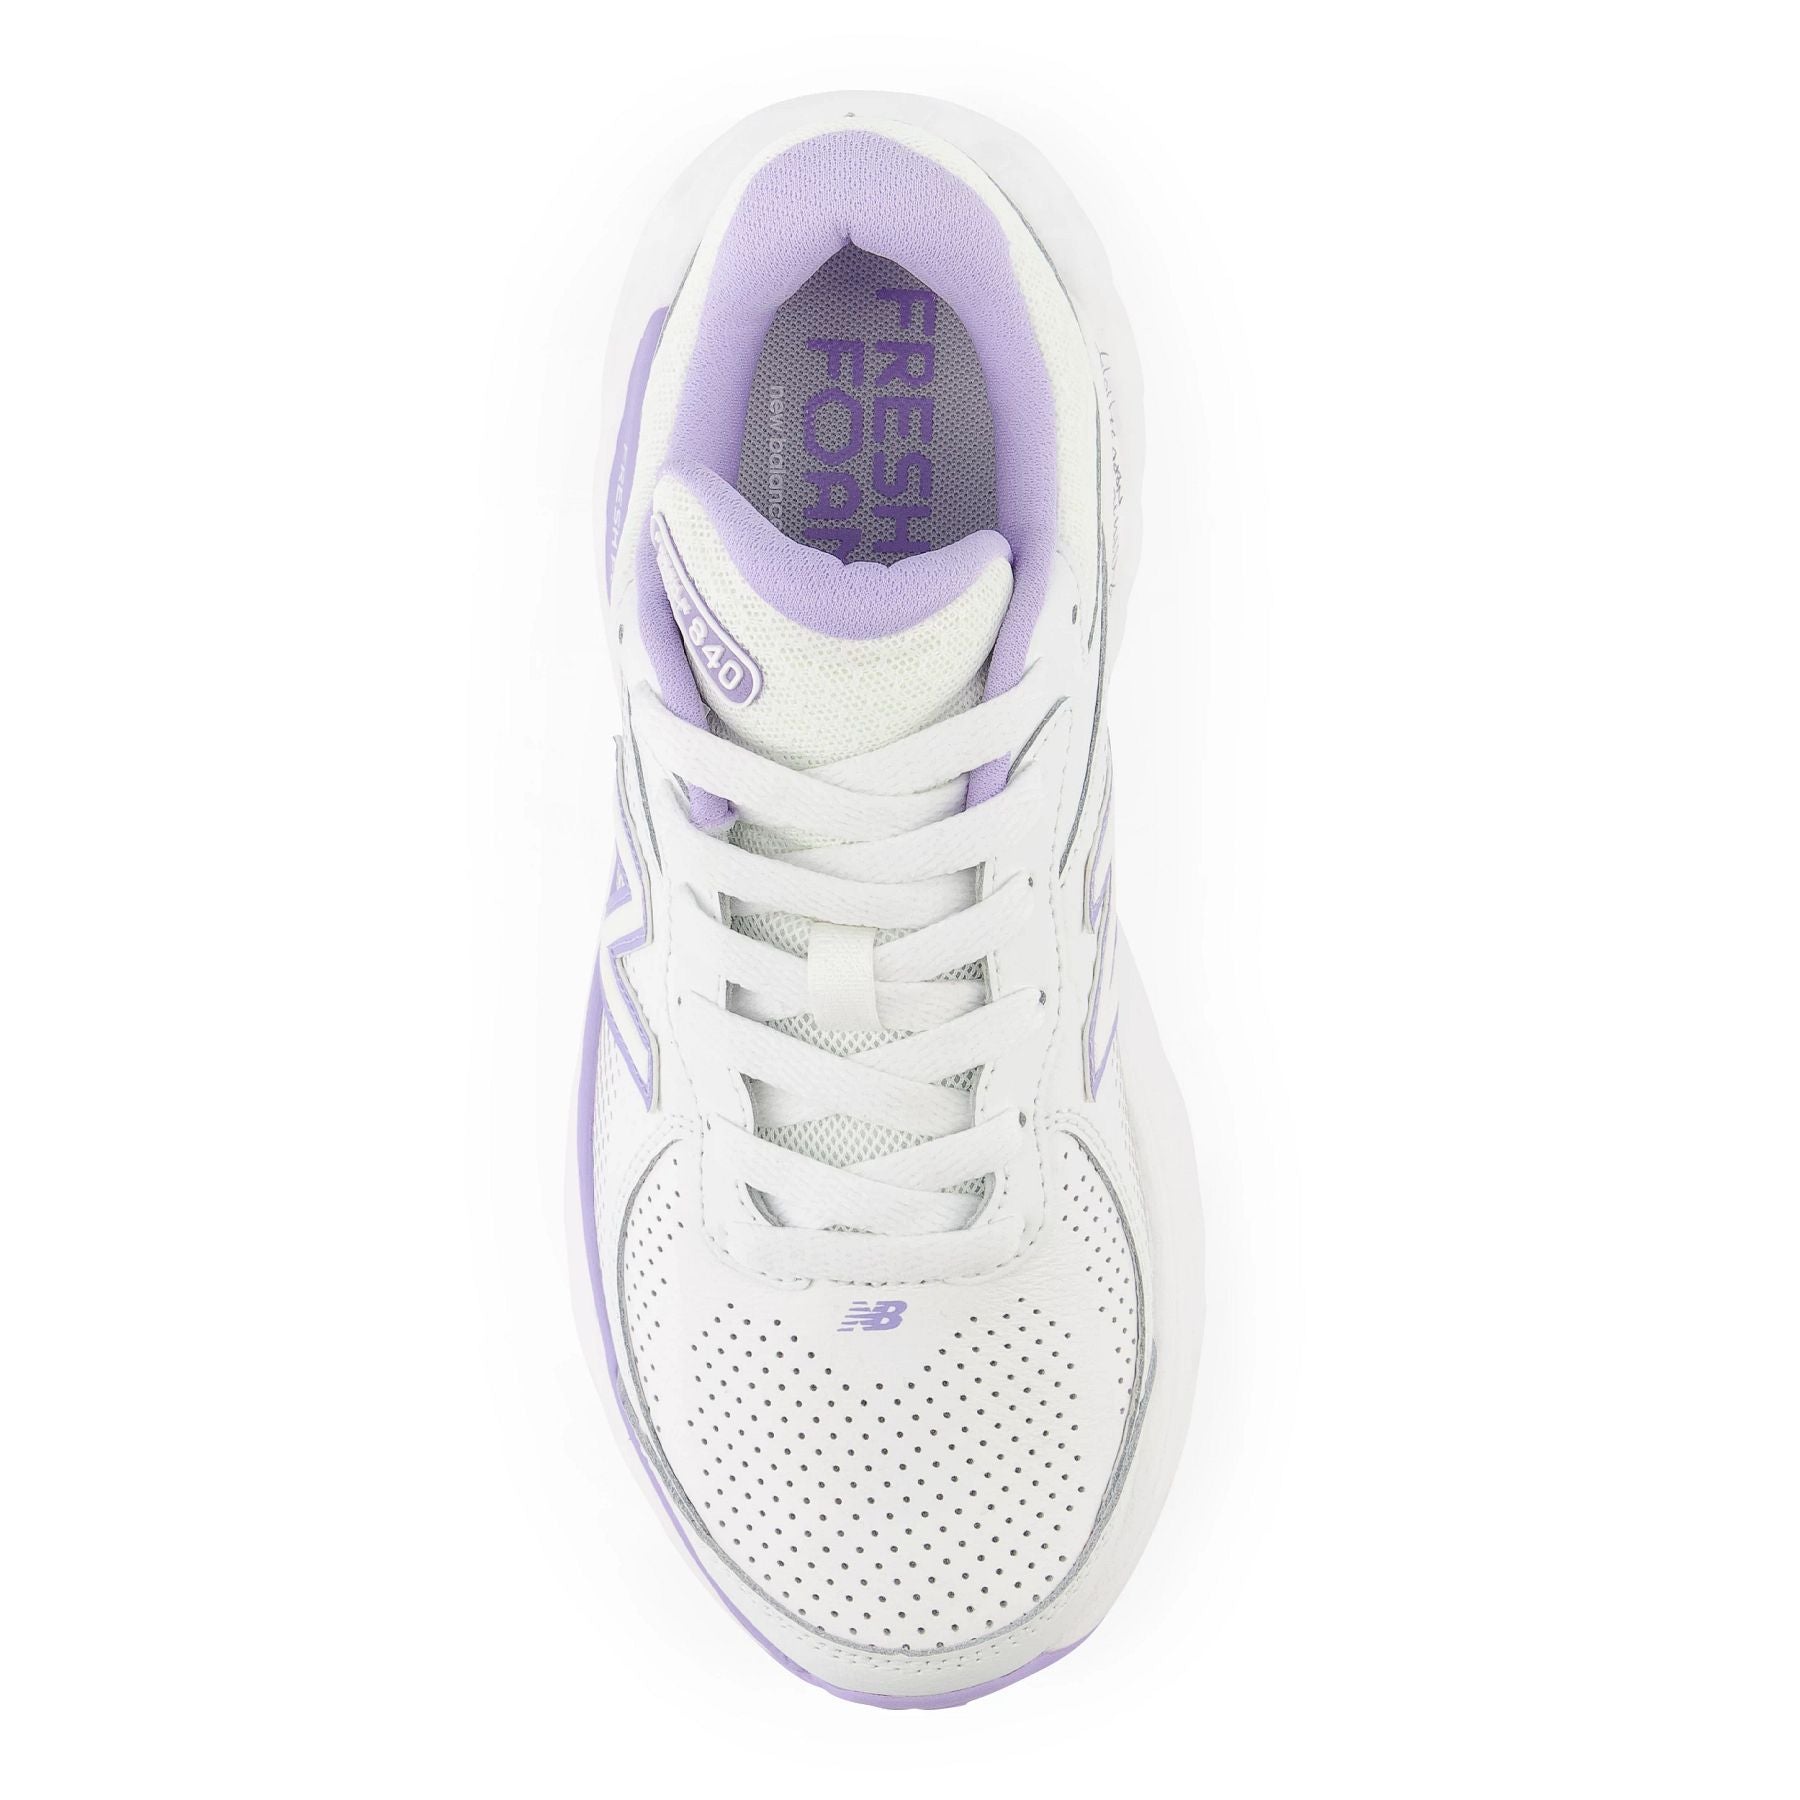 Top view of the Women's leather walking shoe WW840 V1 by New Balance in White/Light Purple